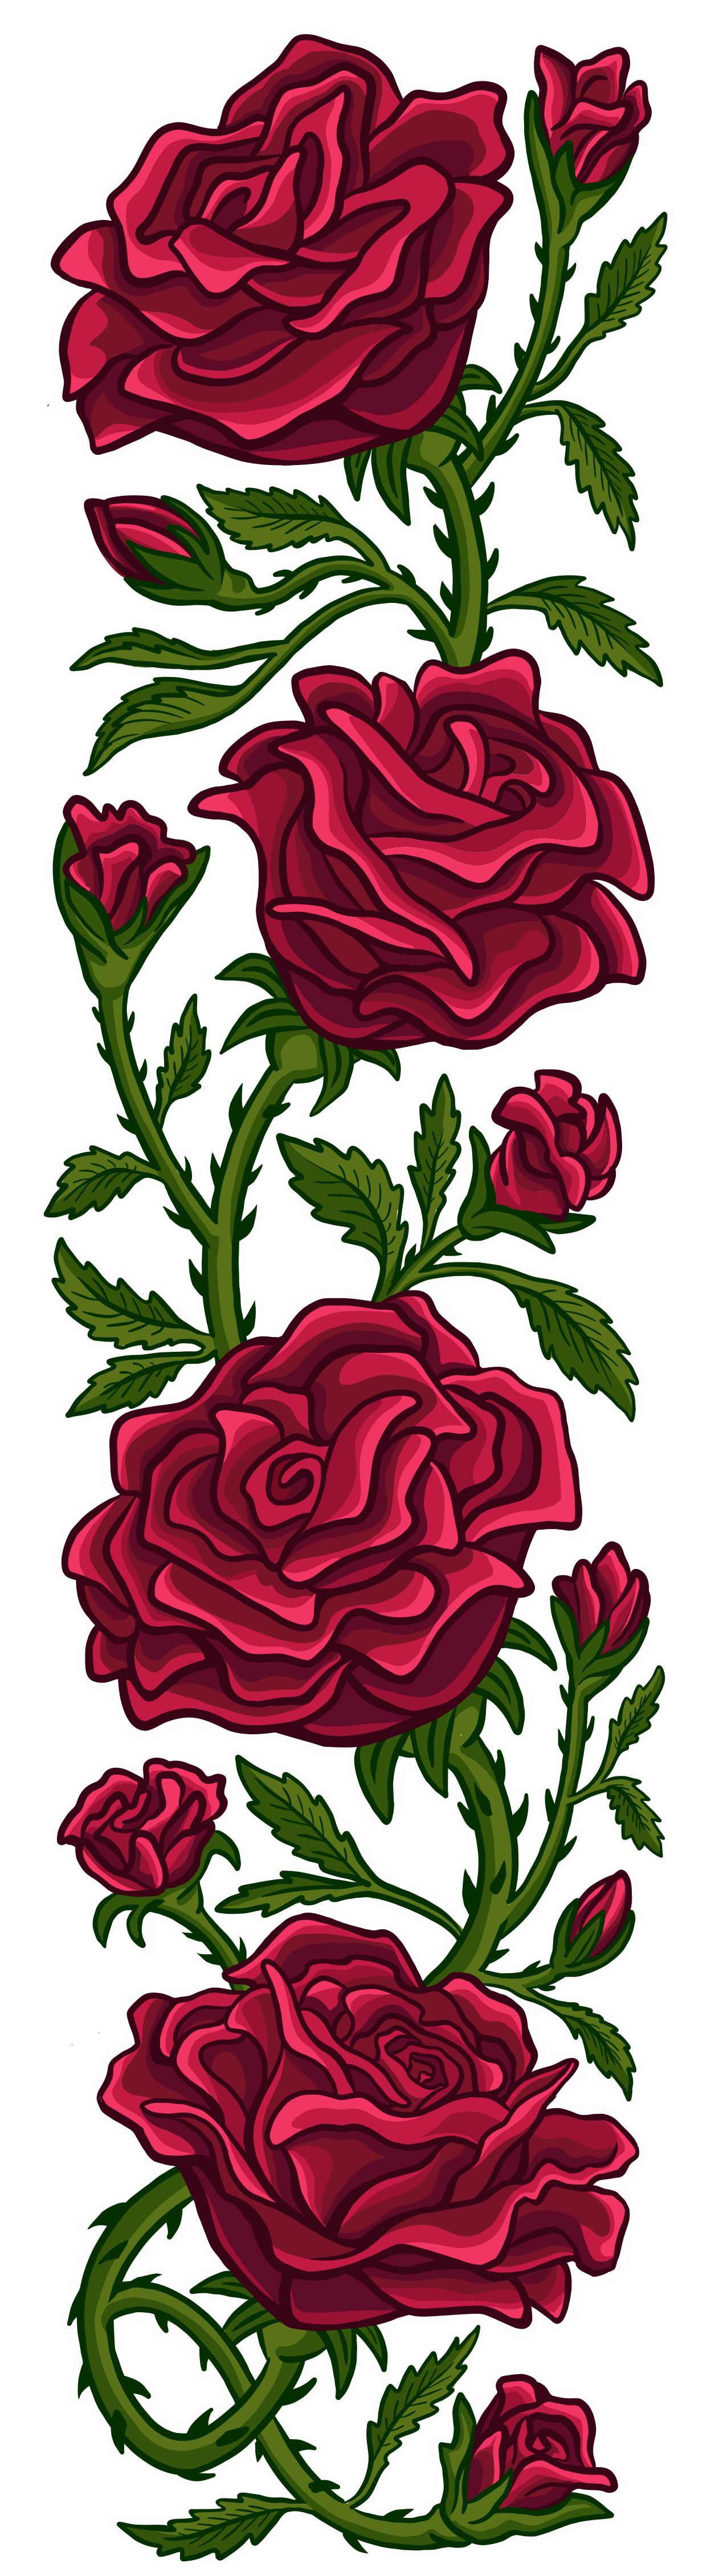 Bold Colorful Floral Red Rose and Skull Cartoon Illustration Logo Graphic by Jessica Laine Morris